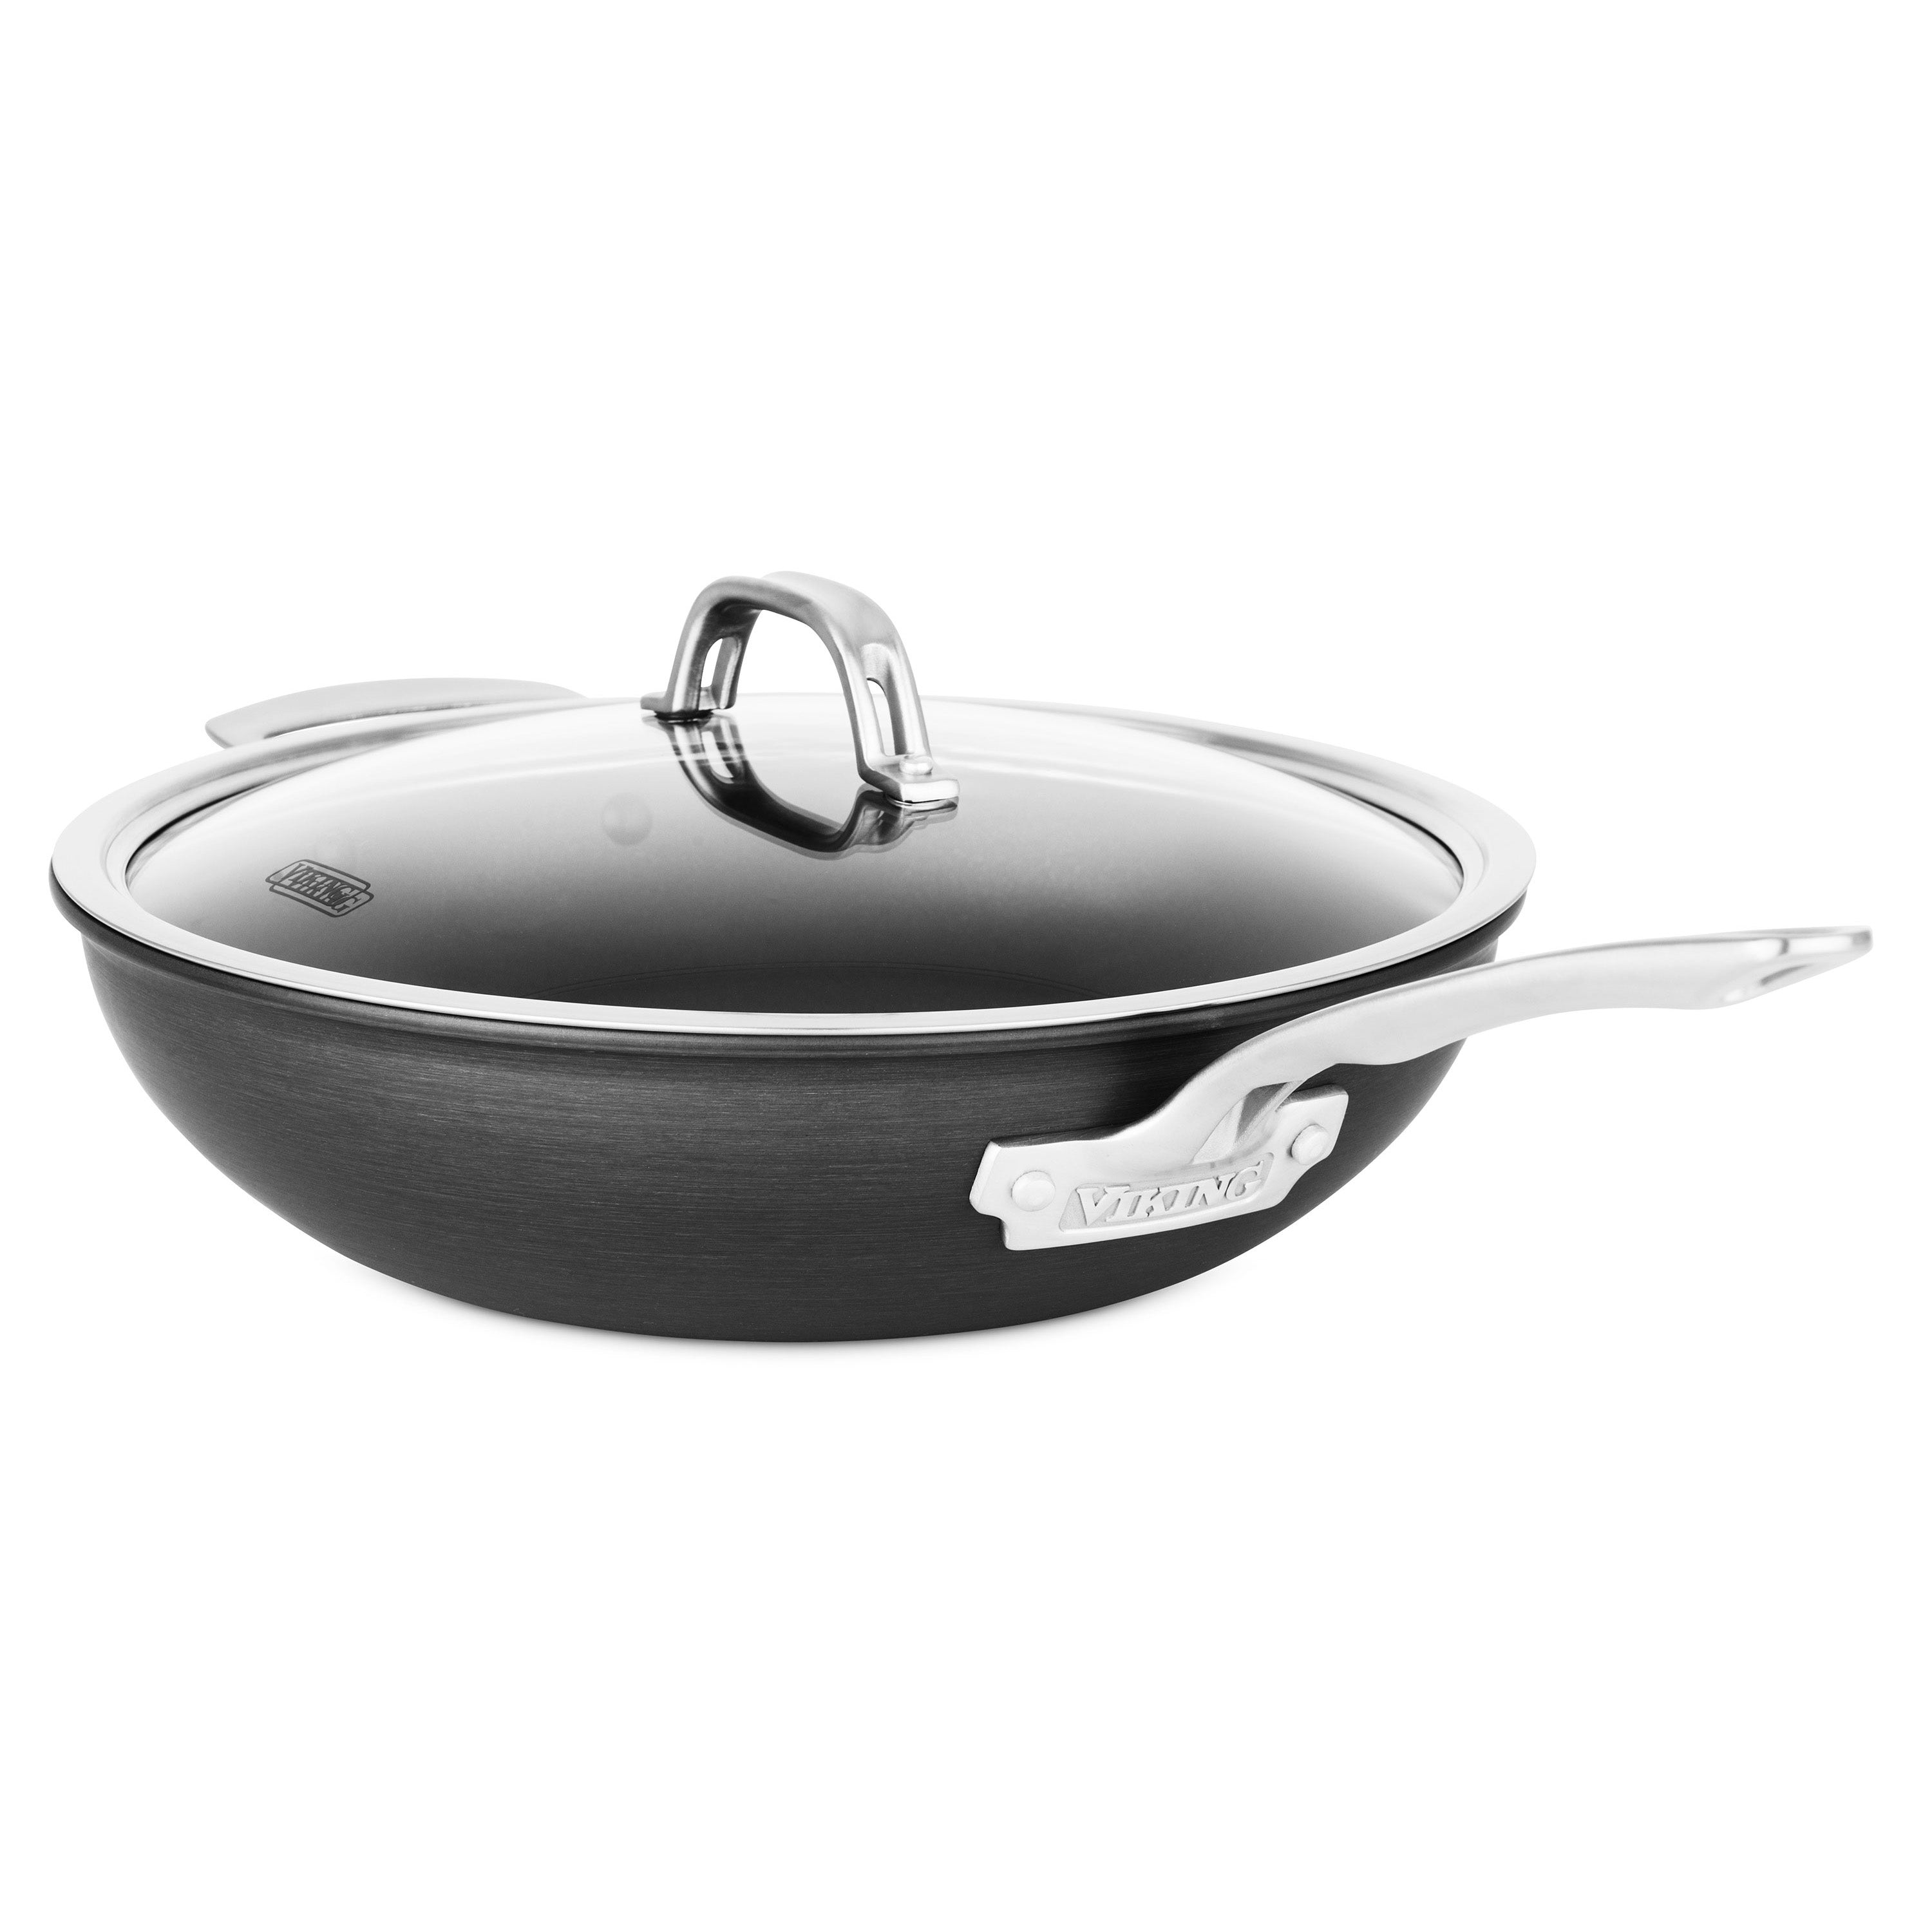  Viking Culinary Hard Anodized Nonstick Fry Pan, 8 inch